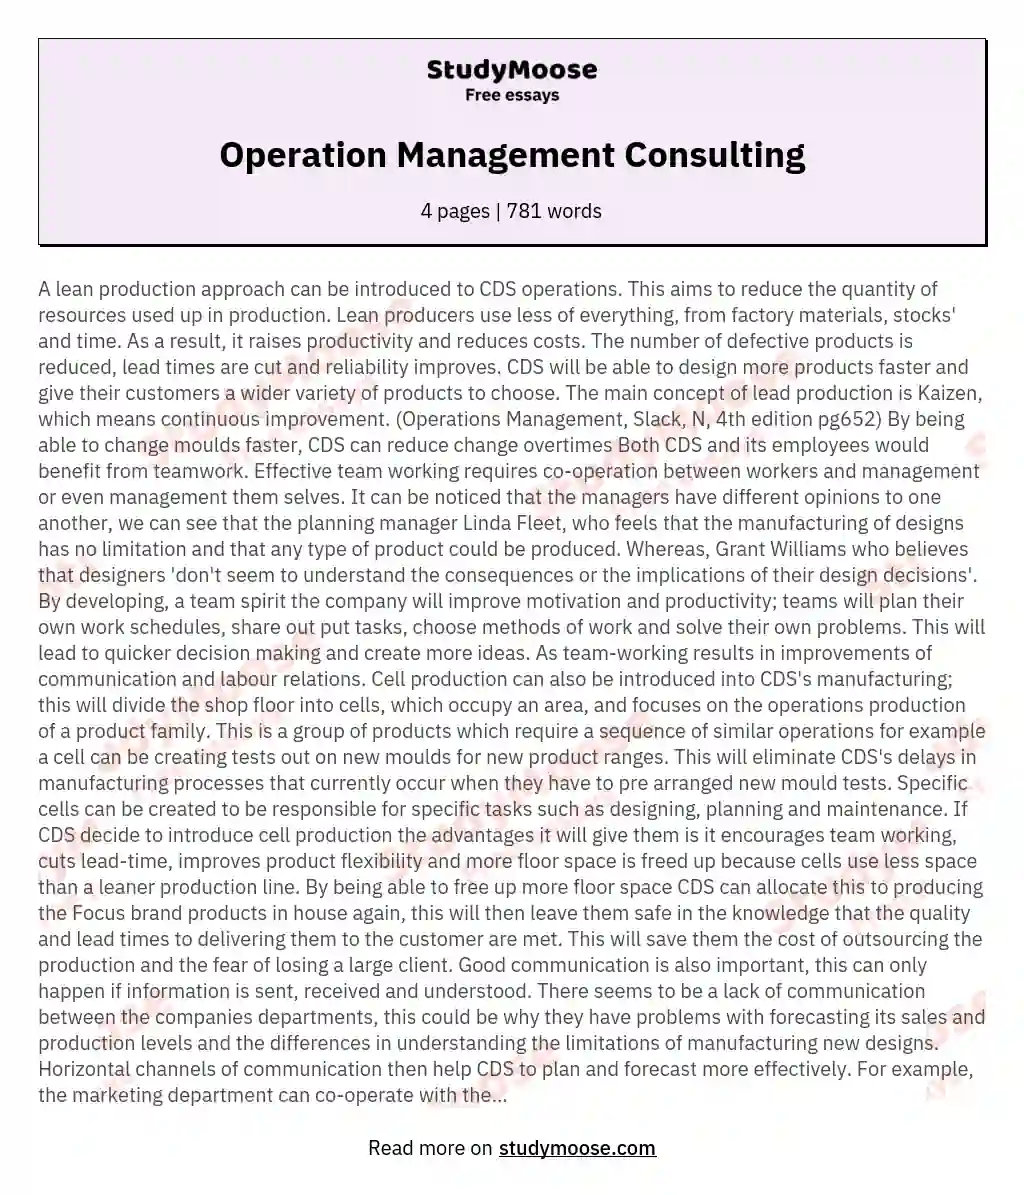 Operation Management Consulting